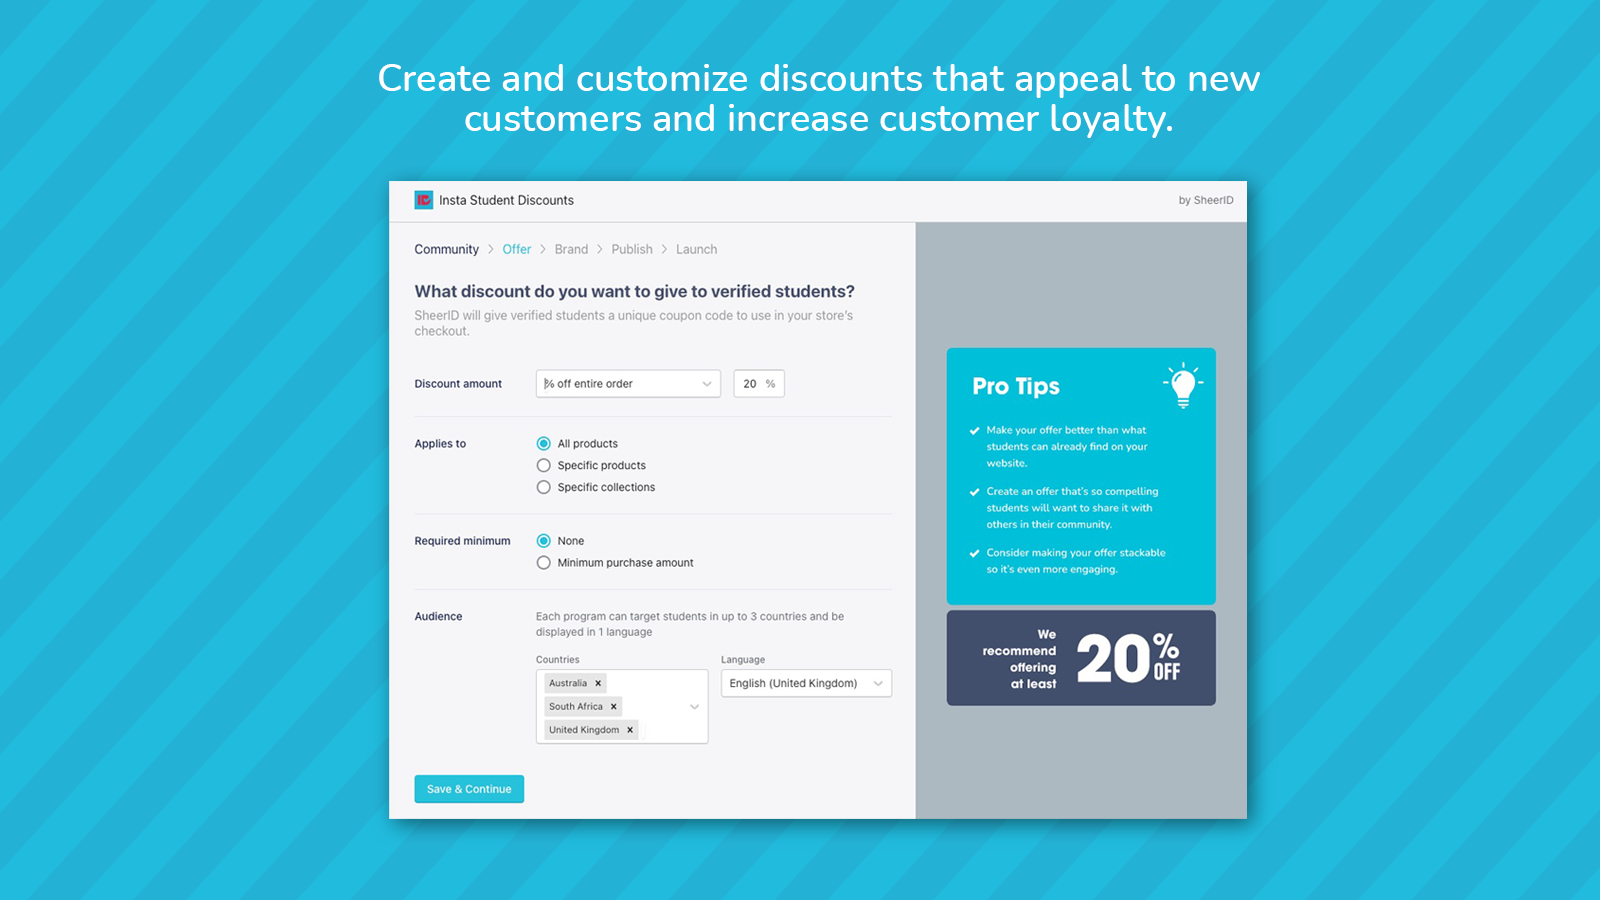 Create and customize discounts that appeal to new customers